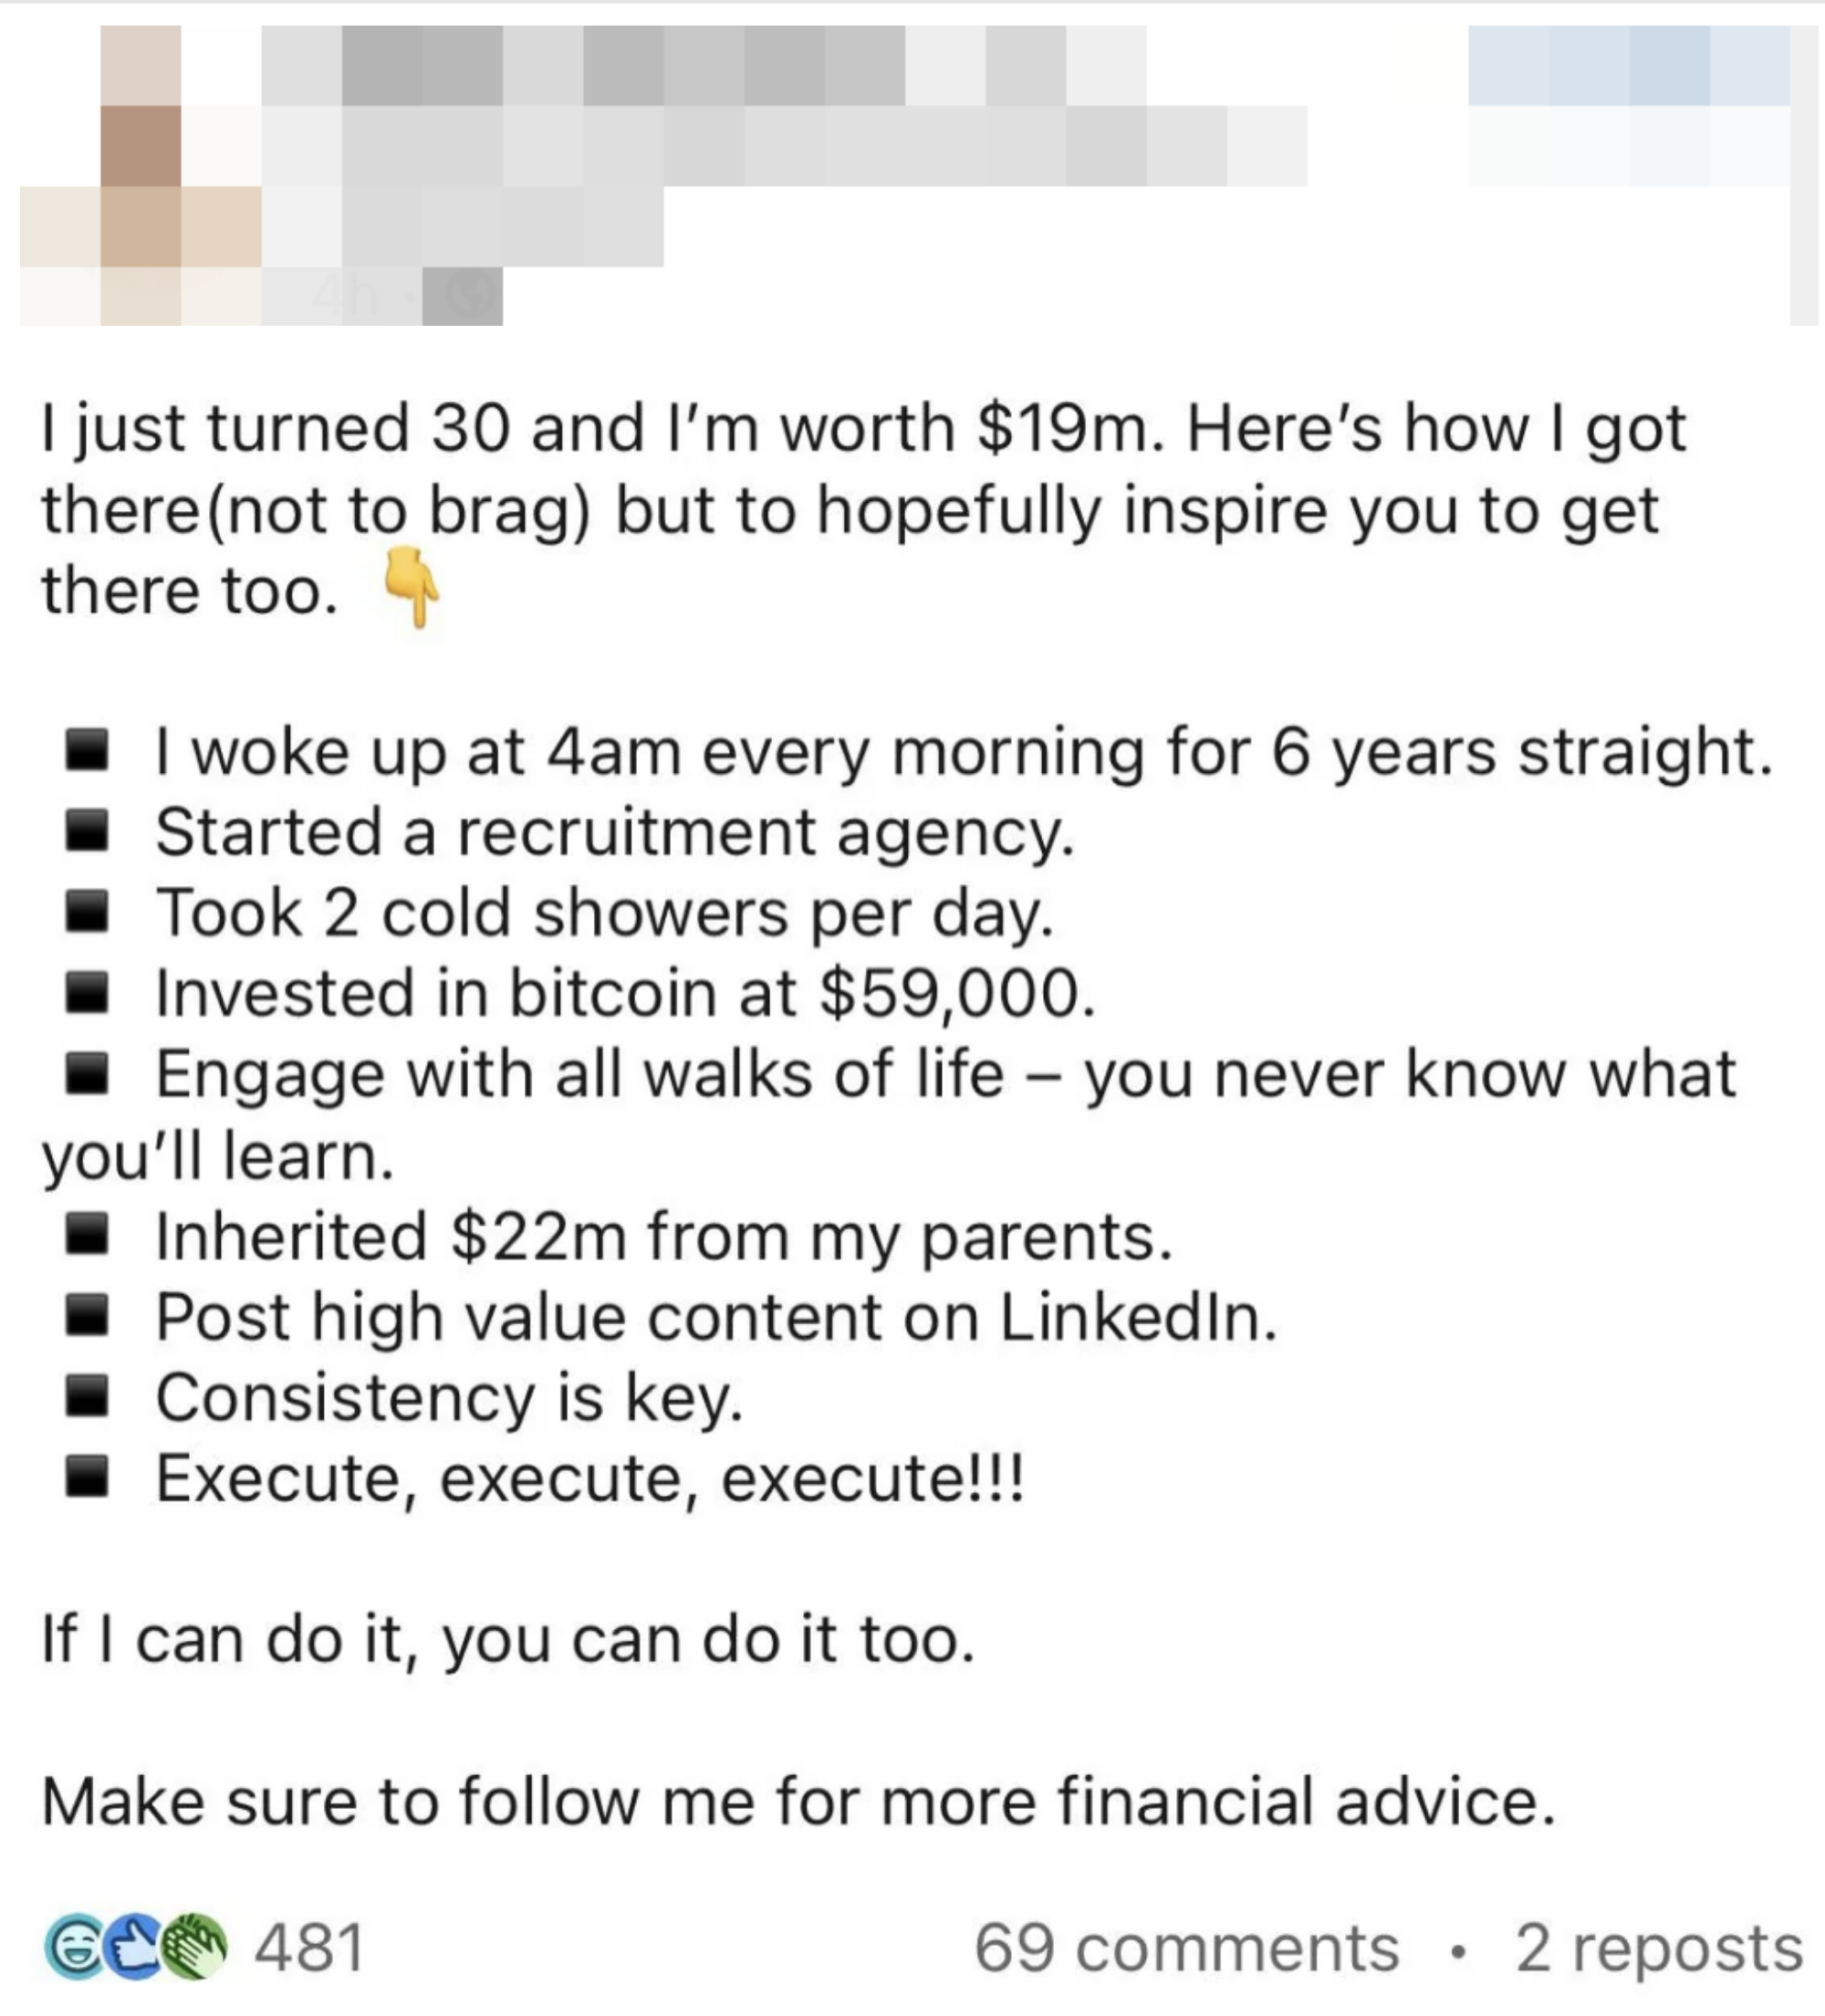 &quot;I just turned 30 and I&#x27;m worth $19m&quot;